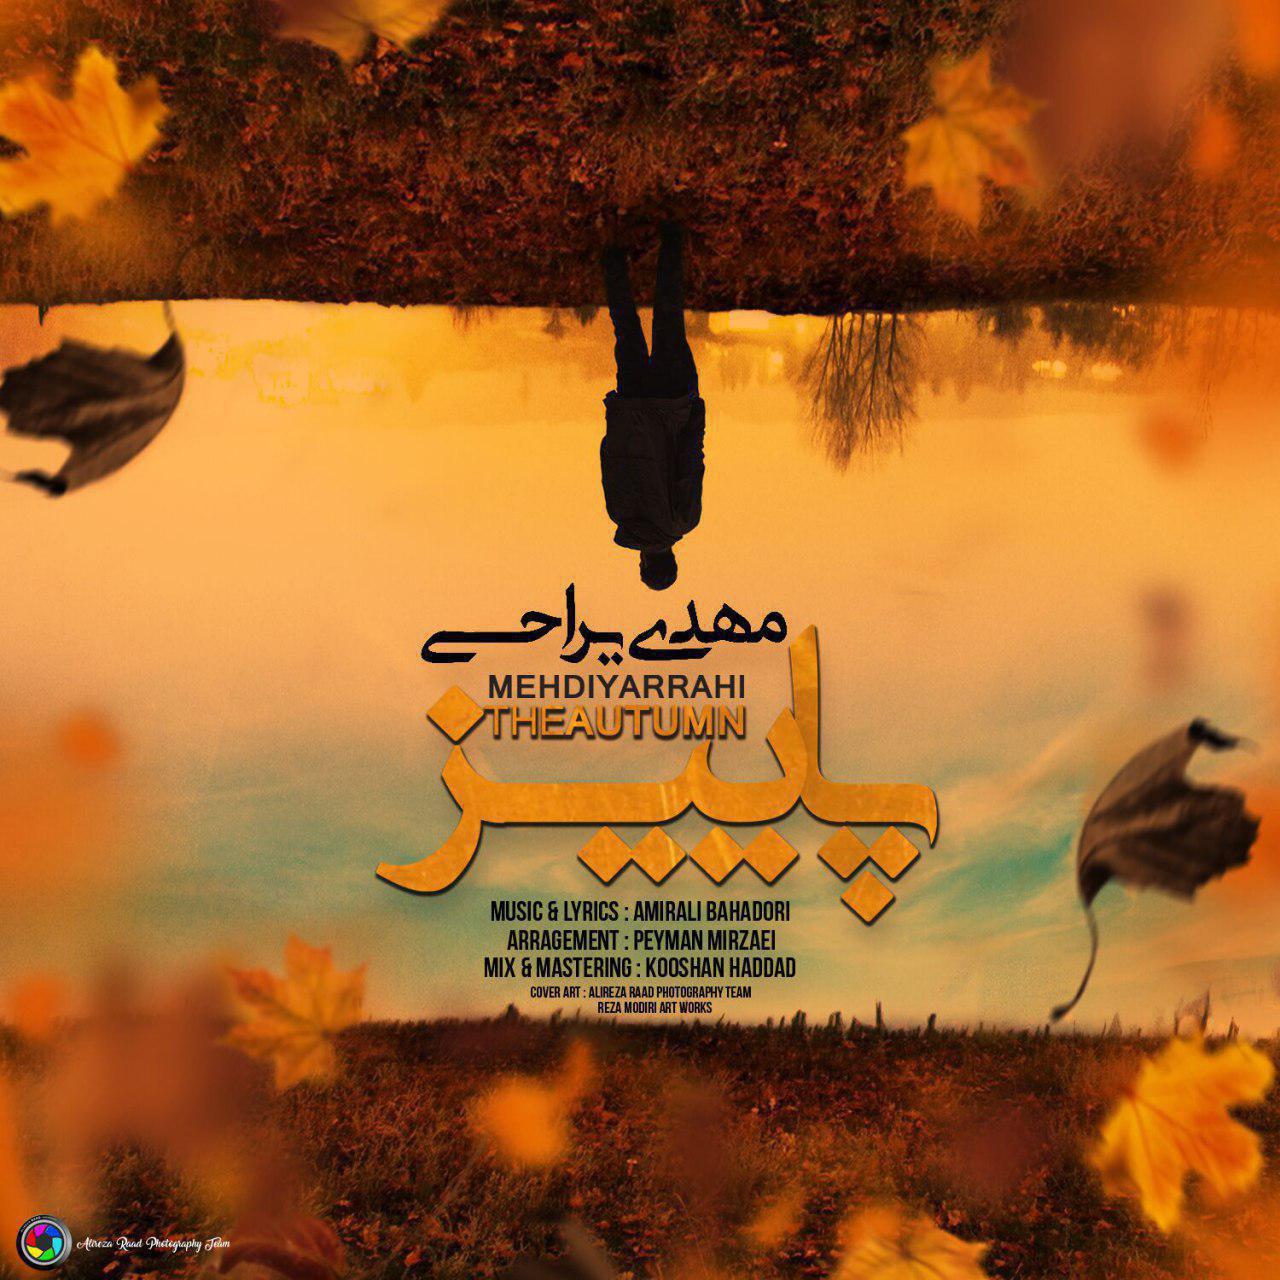 Download New Song, Download New Song By Mehdi Yarrahi Called Paeiz, Download New Song Mehdi Yarrahi Paeiz, Mehdi Yarrahi, Mehdi Yarrahi Paeiz, avinmusic, Paeiz, Paeiz by Mehdi Yarrahi, Paeiz Download New Song By Mehdi Yarrahi, Paeiz Download New Song Mehdi Yarrahi, آهنگ, آهنگ جدید, دانلود, دانلود آهنگ, دانلود آهنگ Mehdi Yarrahi, دانلود آهنگ جدید, دانلود آهنگ جدید Mehdi Yarrahi, دانلود آهنگ جدید Mehdi Yarrahi به نام Paeiz, دانلود آهنگ جدید مهدی یراحی, دانلود آهنگ جدید مهدی یراحی به نام پاییز, دانلود آهنگ جدید مهدی یراحی پاییز, دانلود آهنگ مهدی یراحی به نام پاییز, دانلود آهنگ مهدی یراحی پاییز, مهدی یراحی, آوین موزیک, پاییز, پاییز دانلود آهنگ مهدی یراحی, کد پیشواز آهنگ های مهدی یراحی